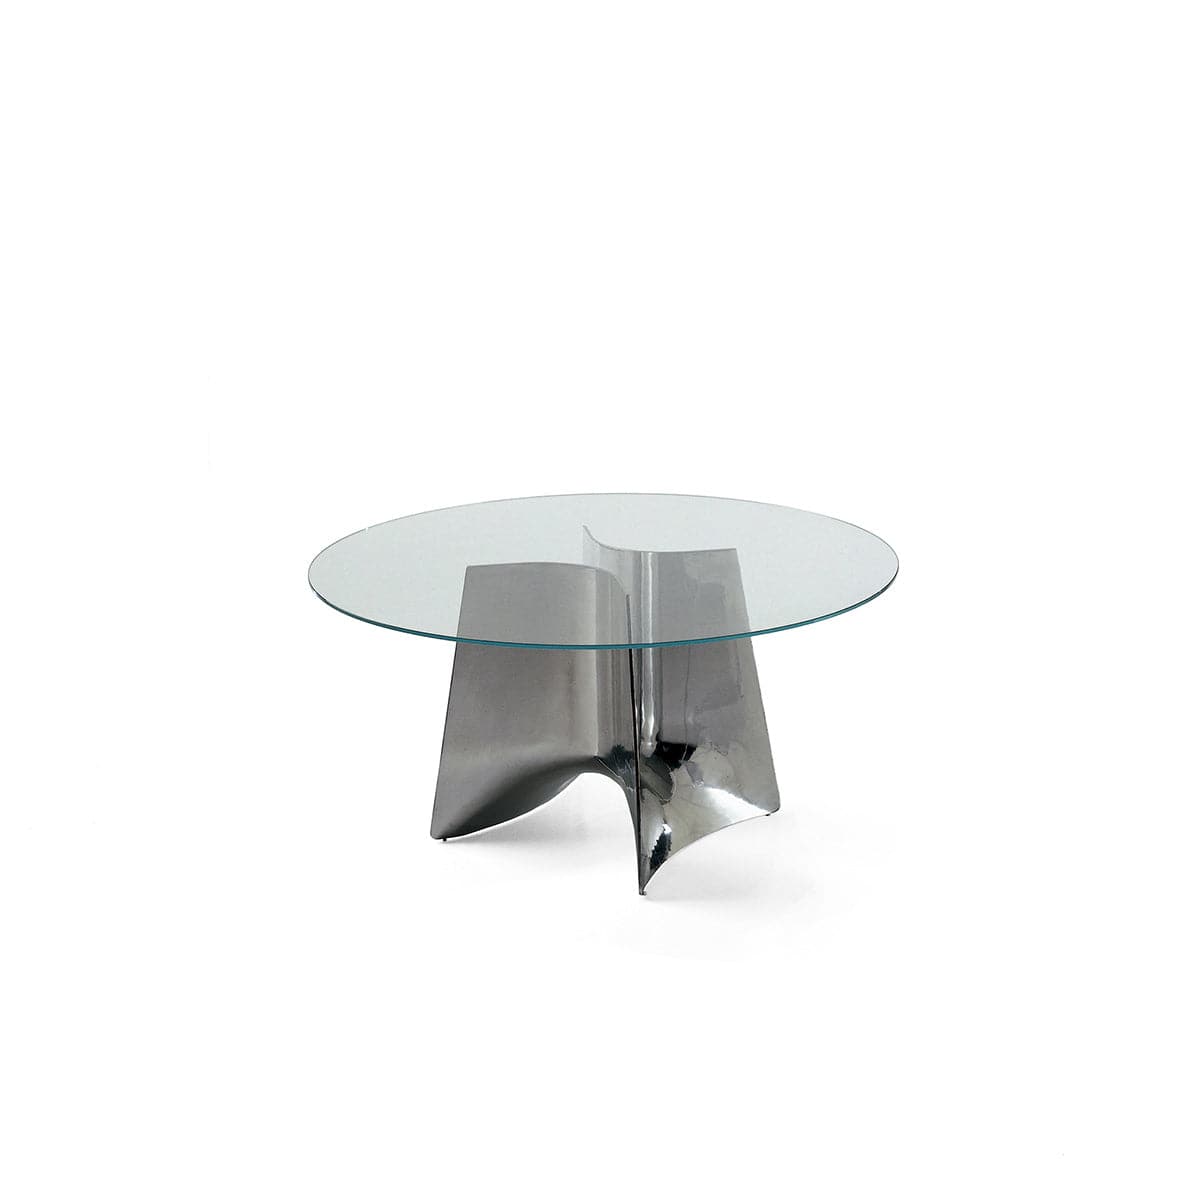 Crystal and Alluminium Round Table BENTZ 140 Grey by Jeff Miller 01